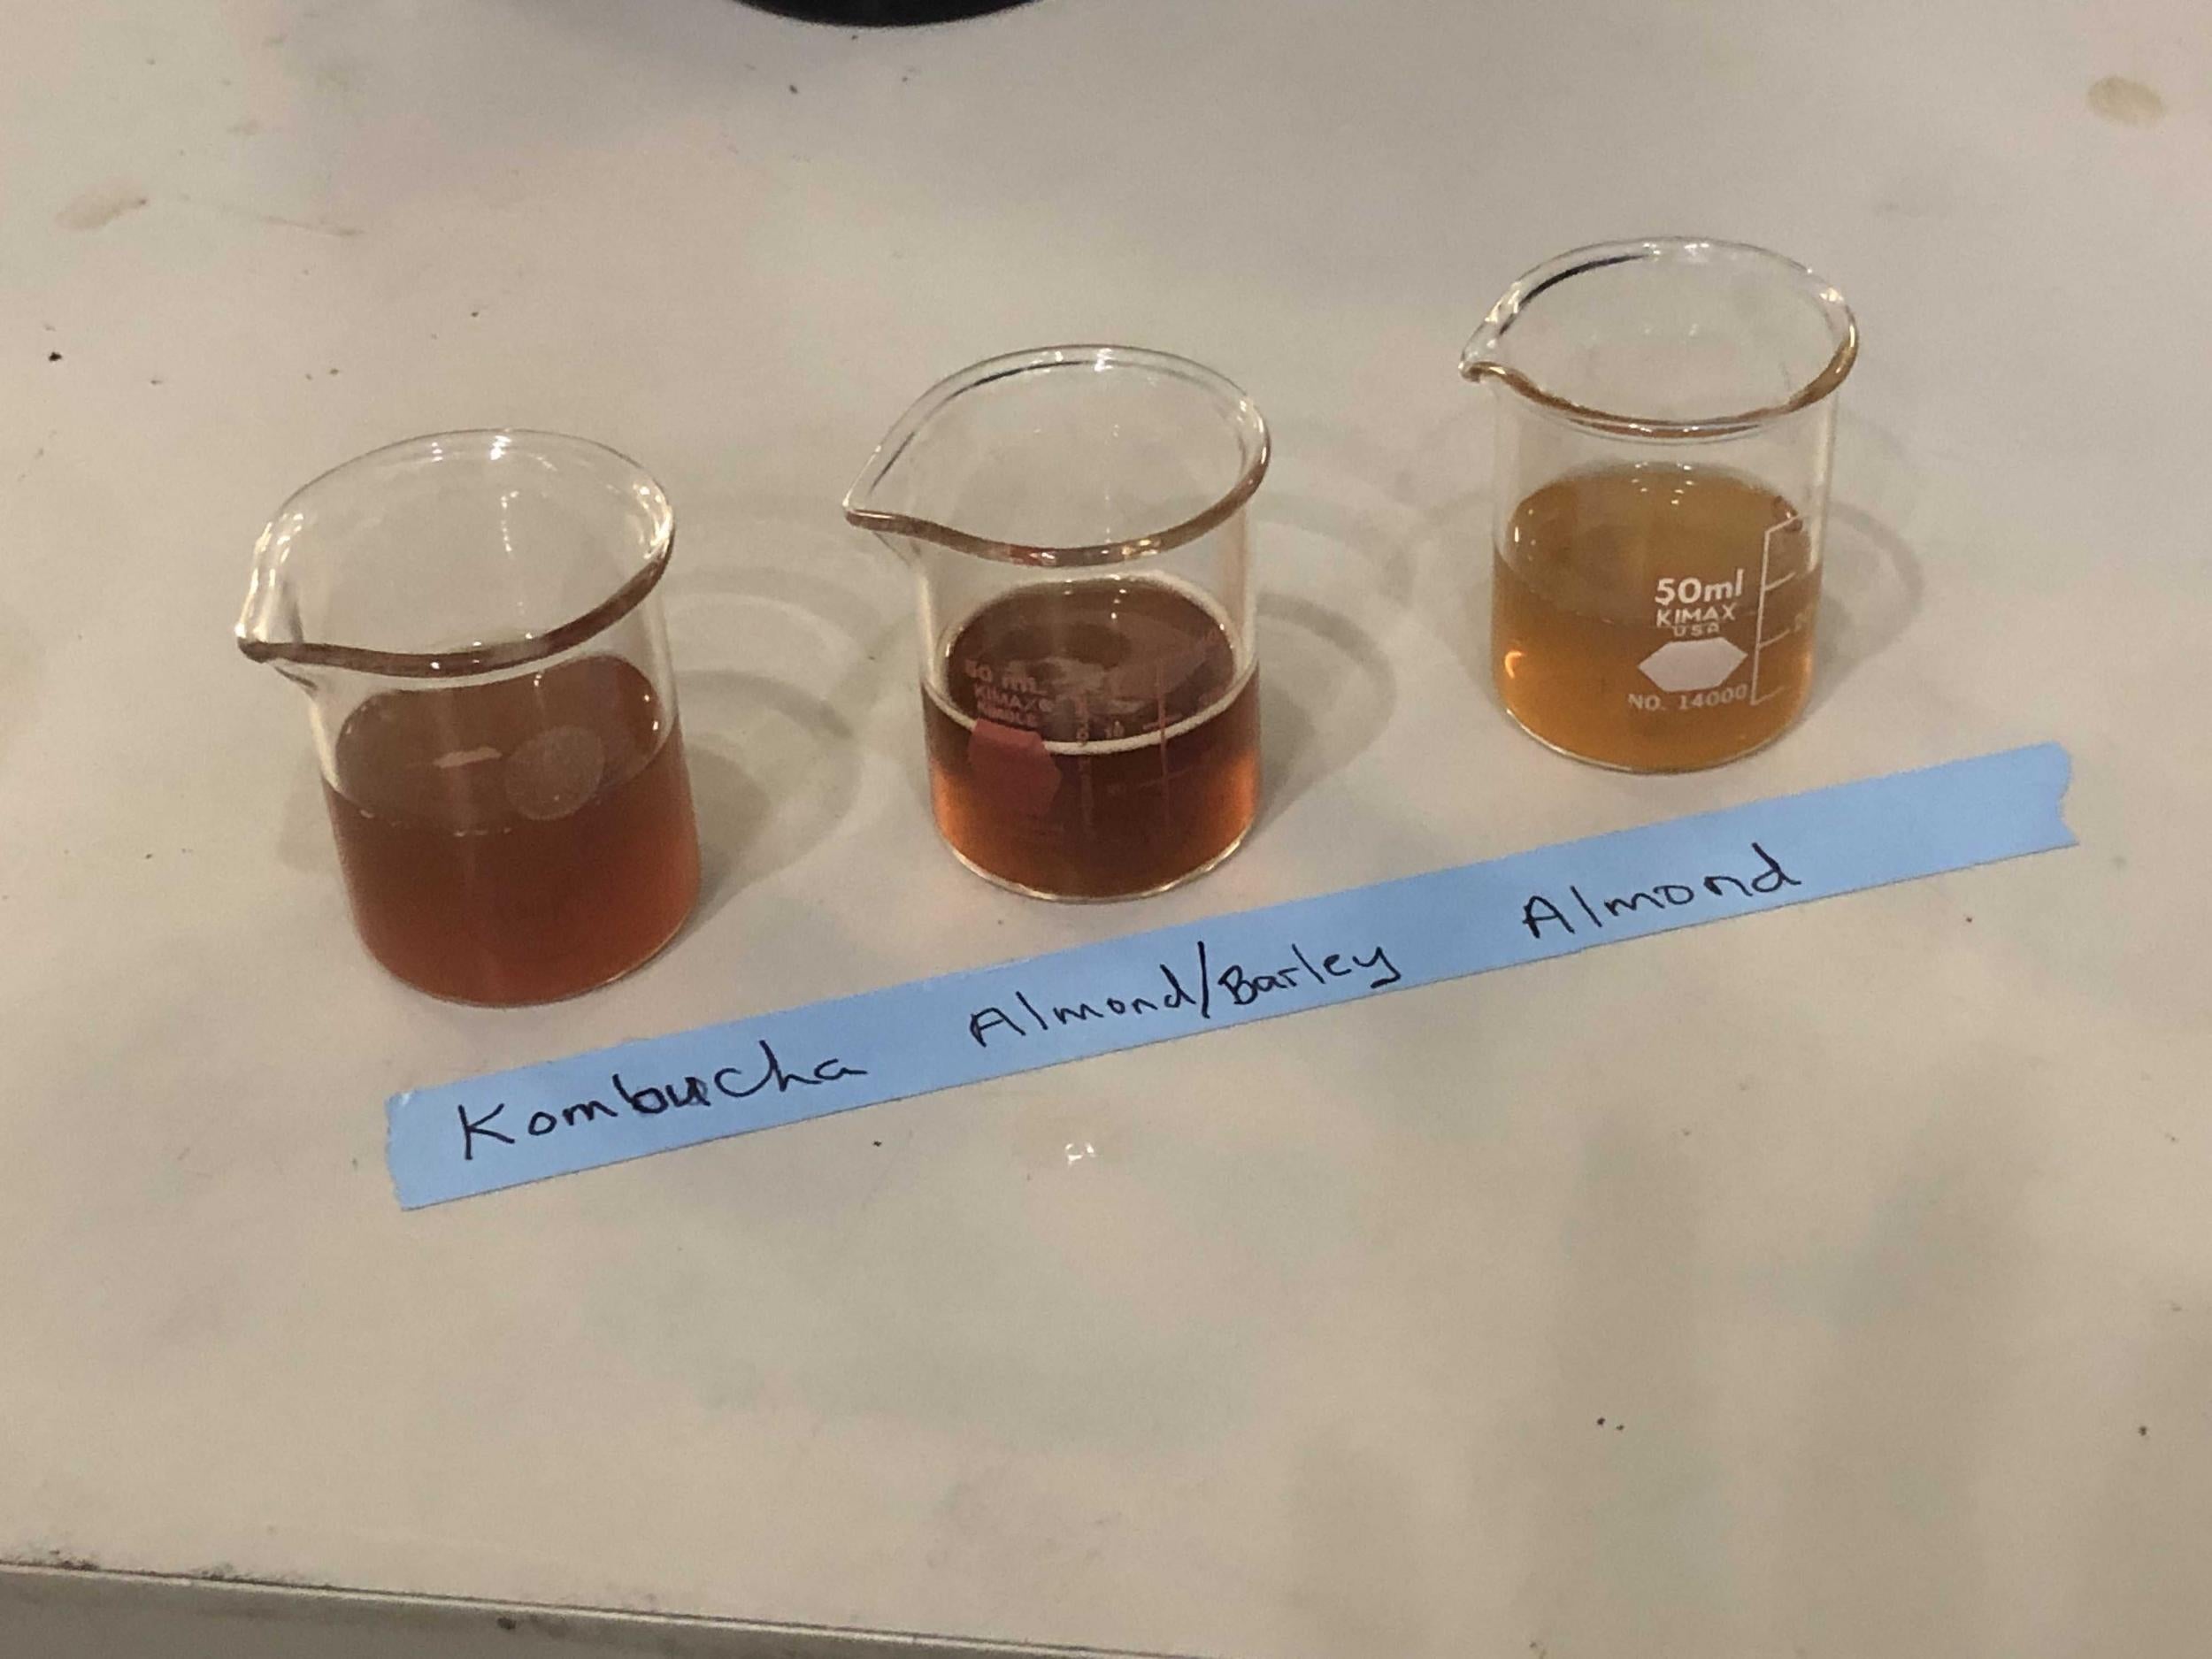 USDA researchers have created kombucha from almond waste